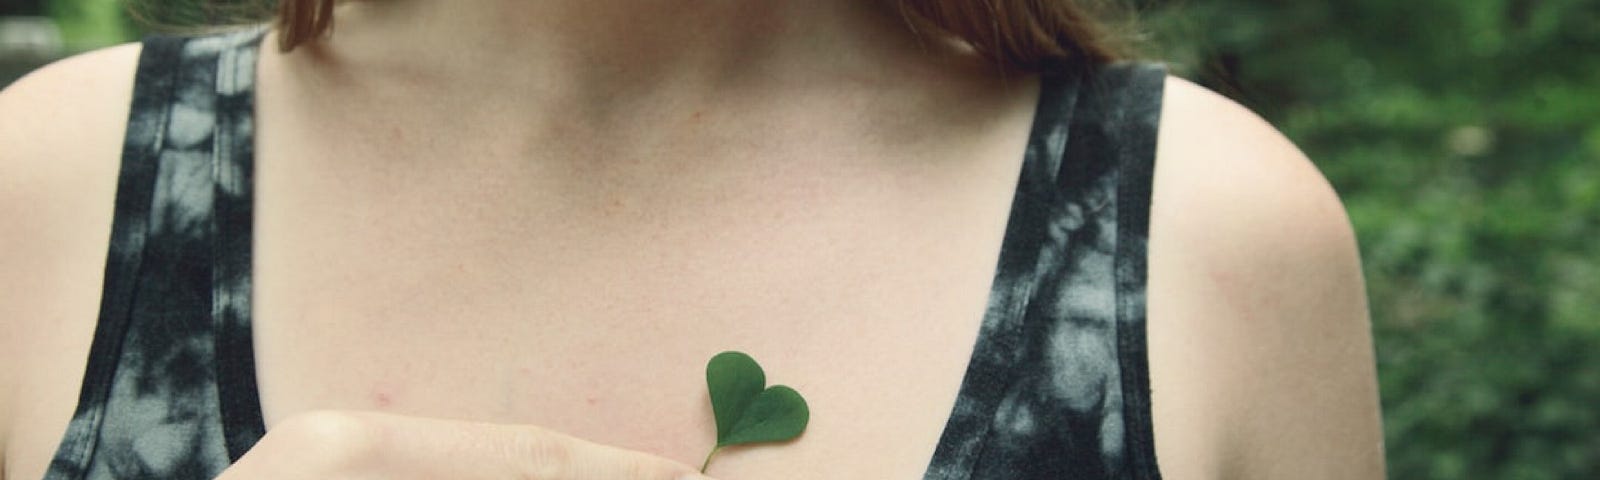 Photo of woman’s upper torso holding a heart-shaped clover.